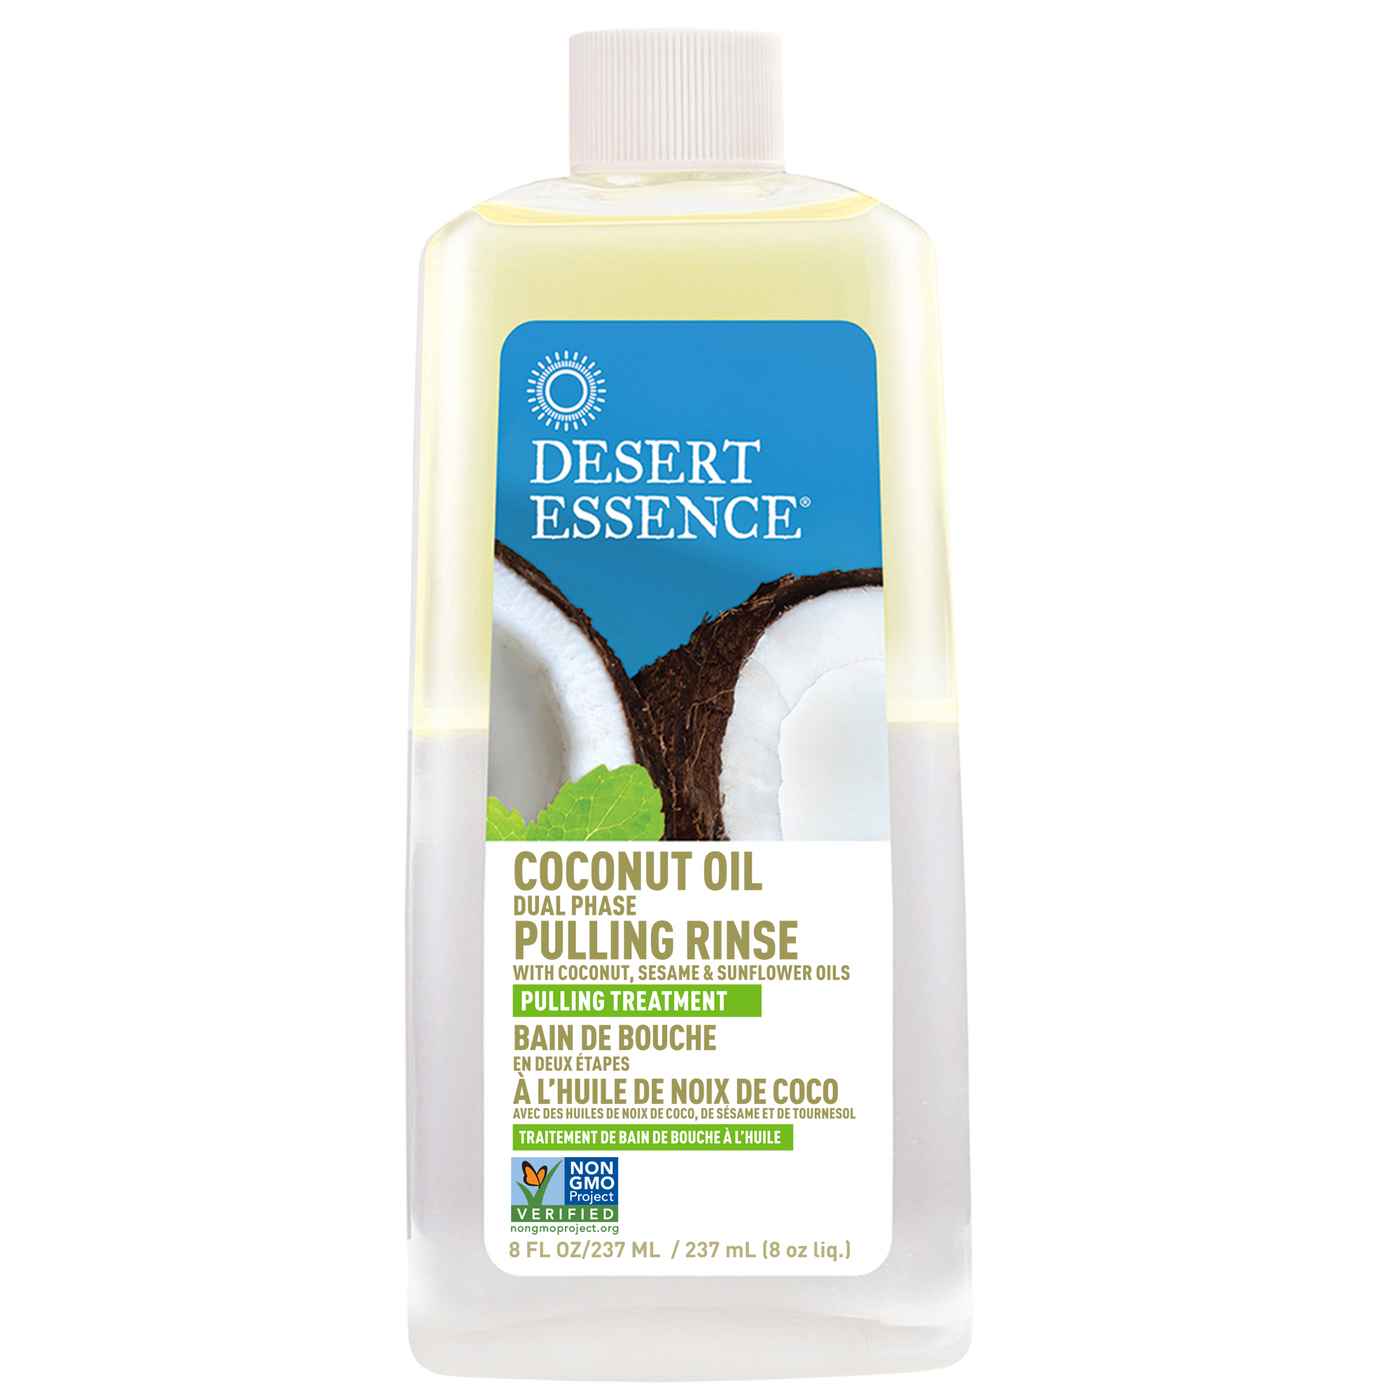 Coconut Oil Pulling Rinse 8 fl oz Curated Wellness